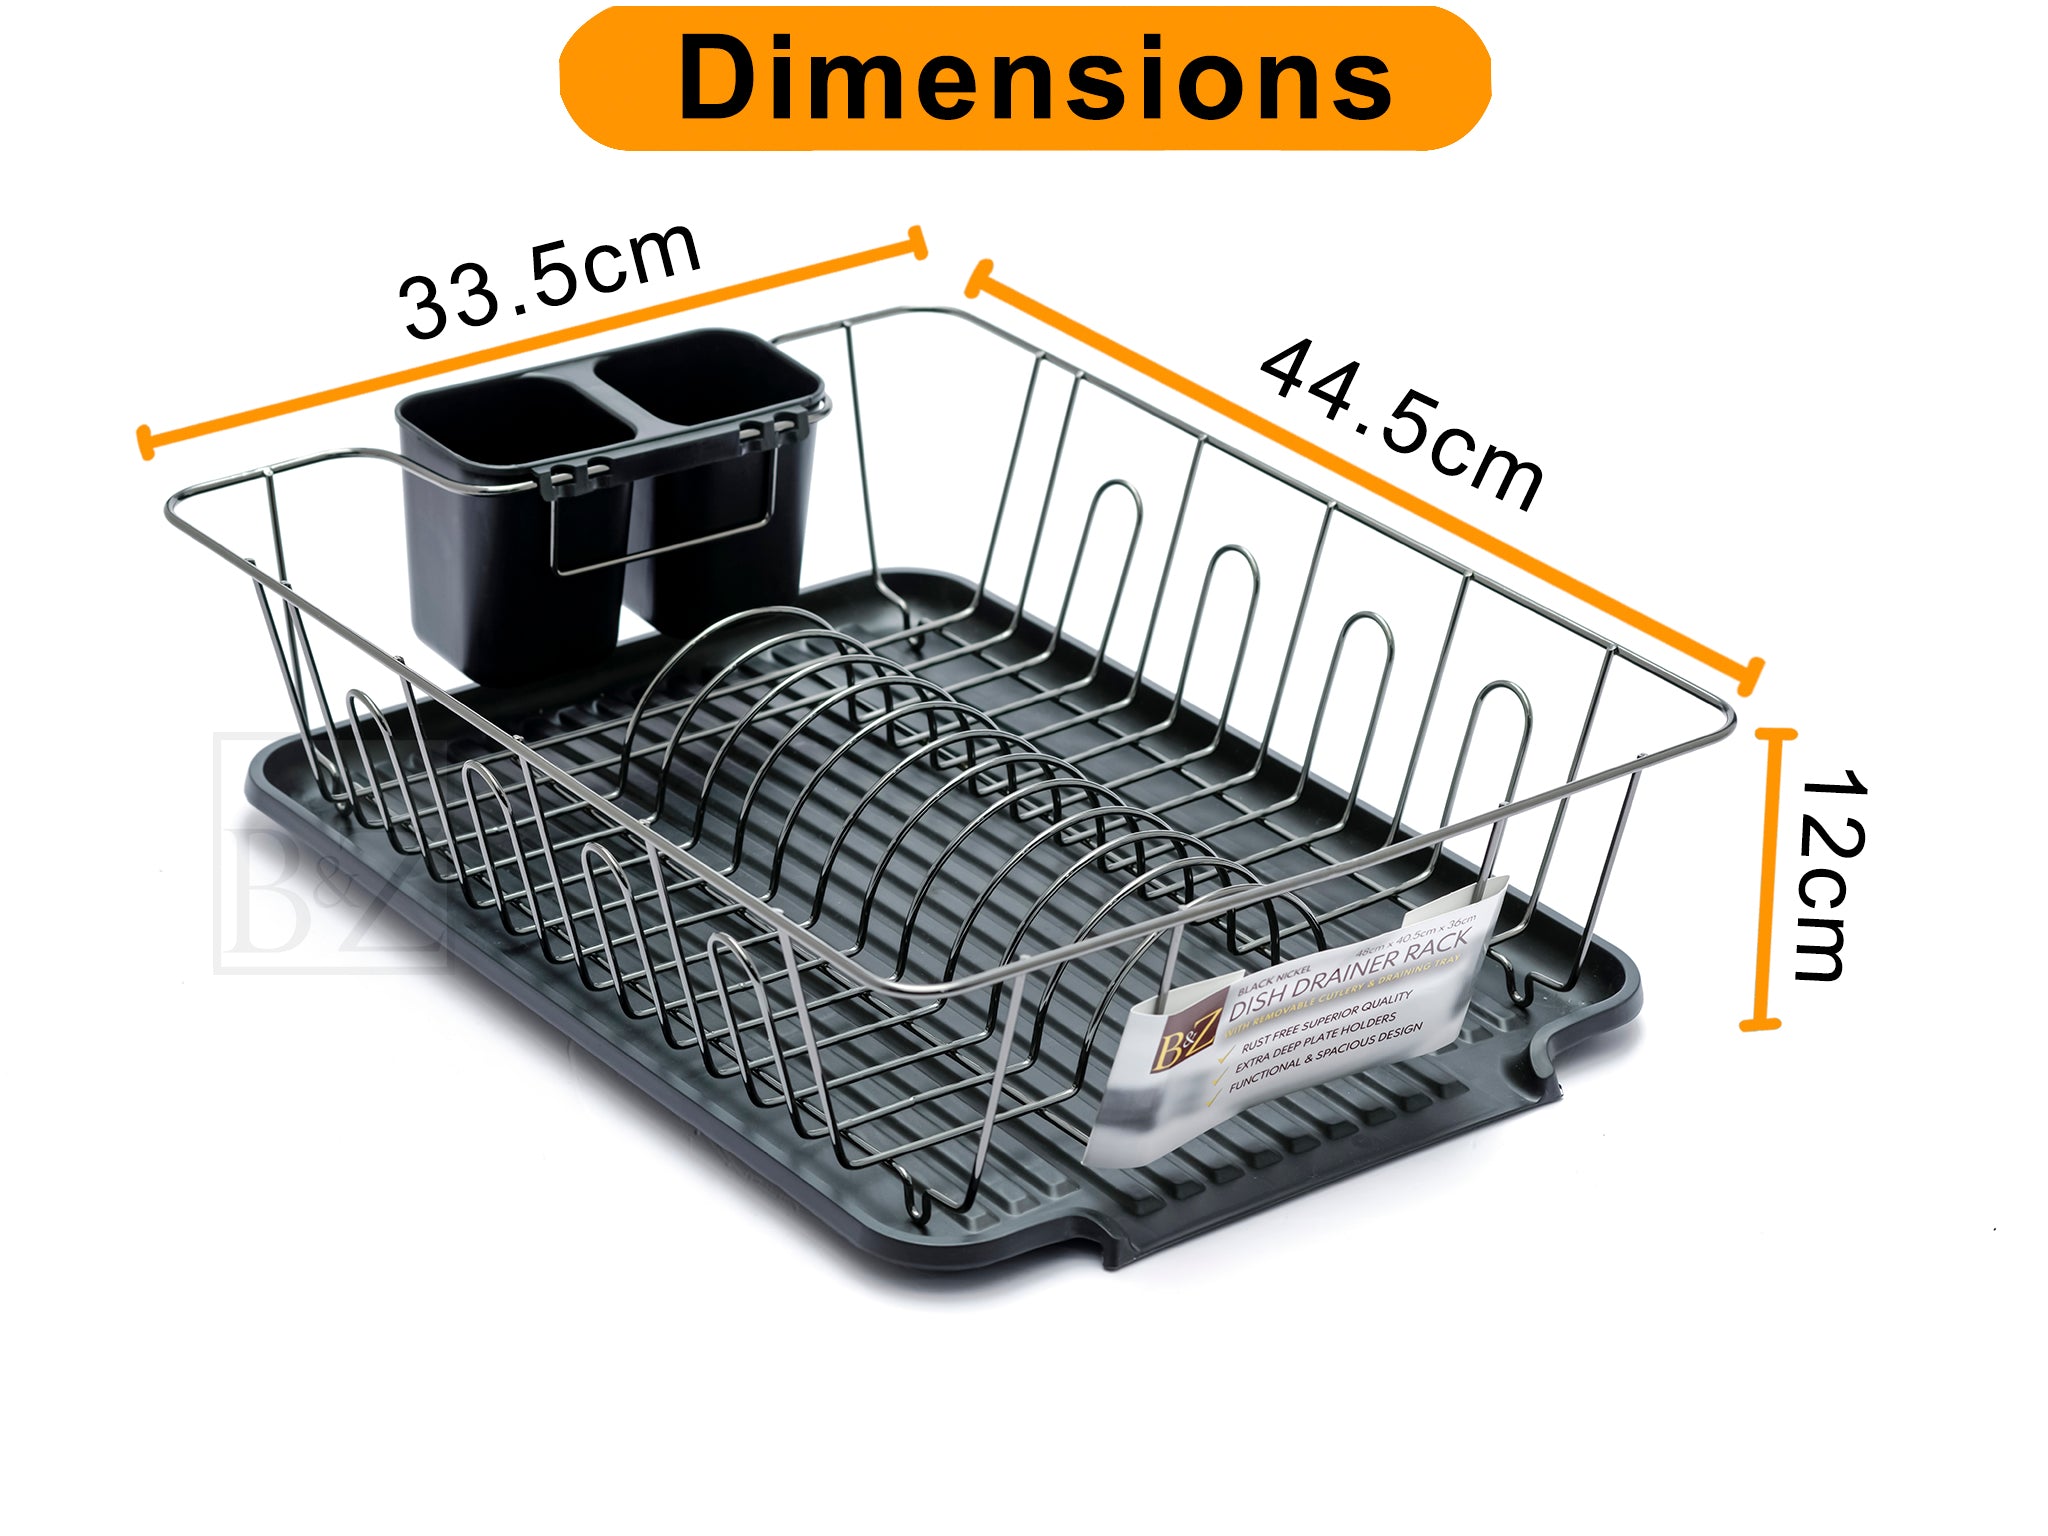 B&Z Nickle Large Dish Drying Rack With Cutlery Holder Countertop Metal Dish  Drainer Plate Organizer 44.5 X 33.5 X 12cm -  Norway